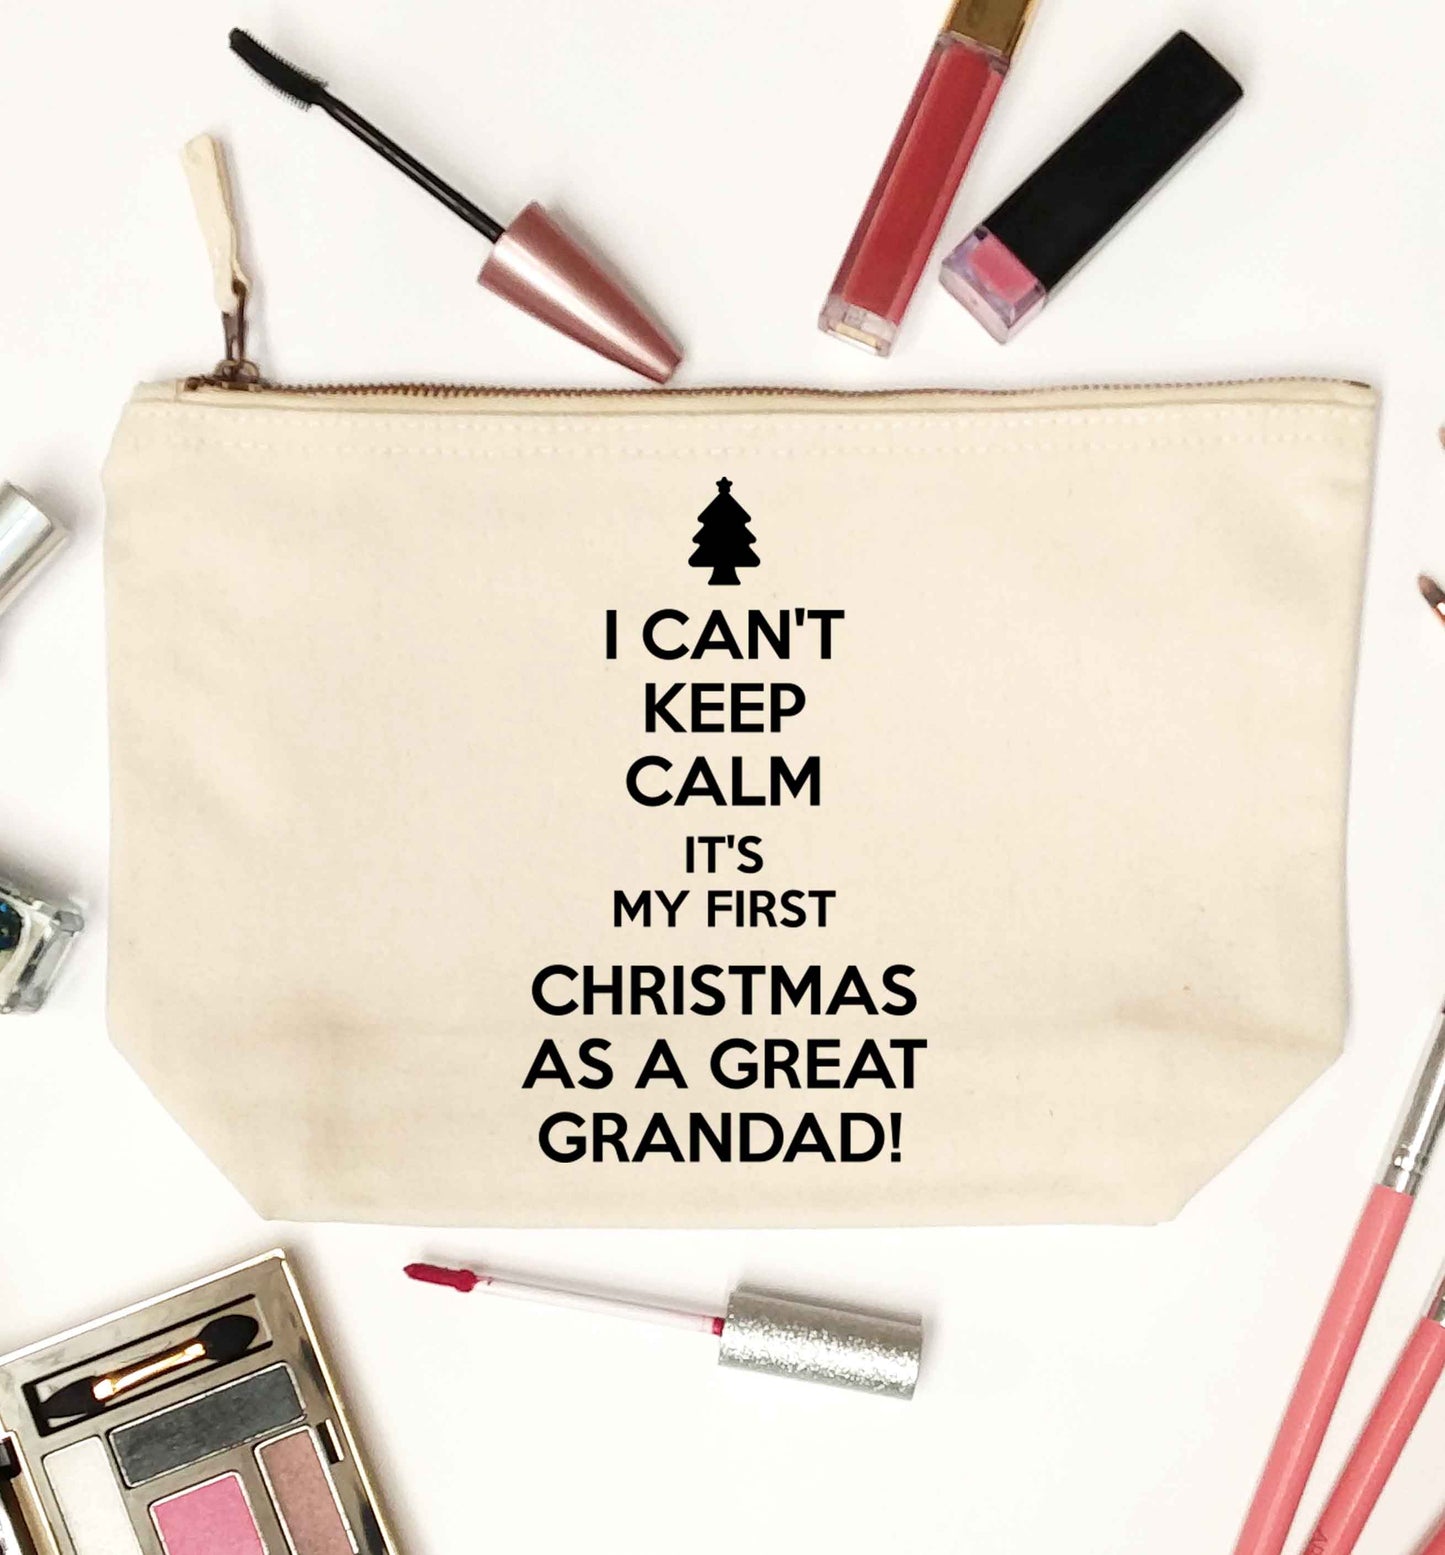 I can't keep calm it's my first Christmas as a great grandad! natural makeup bag